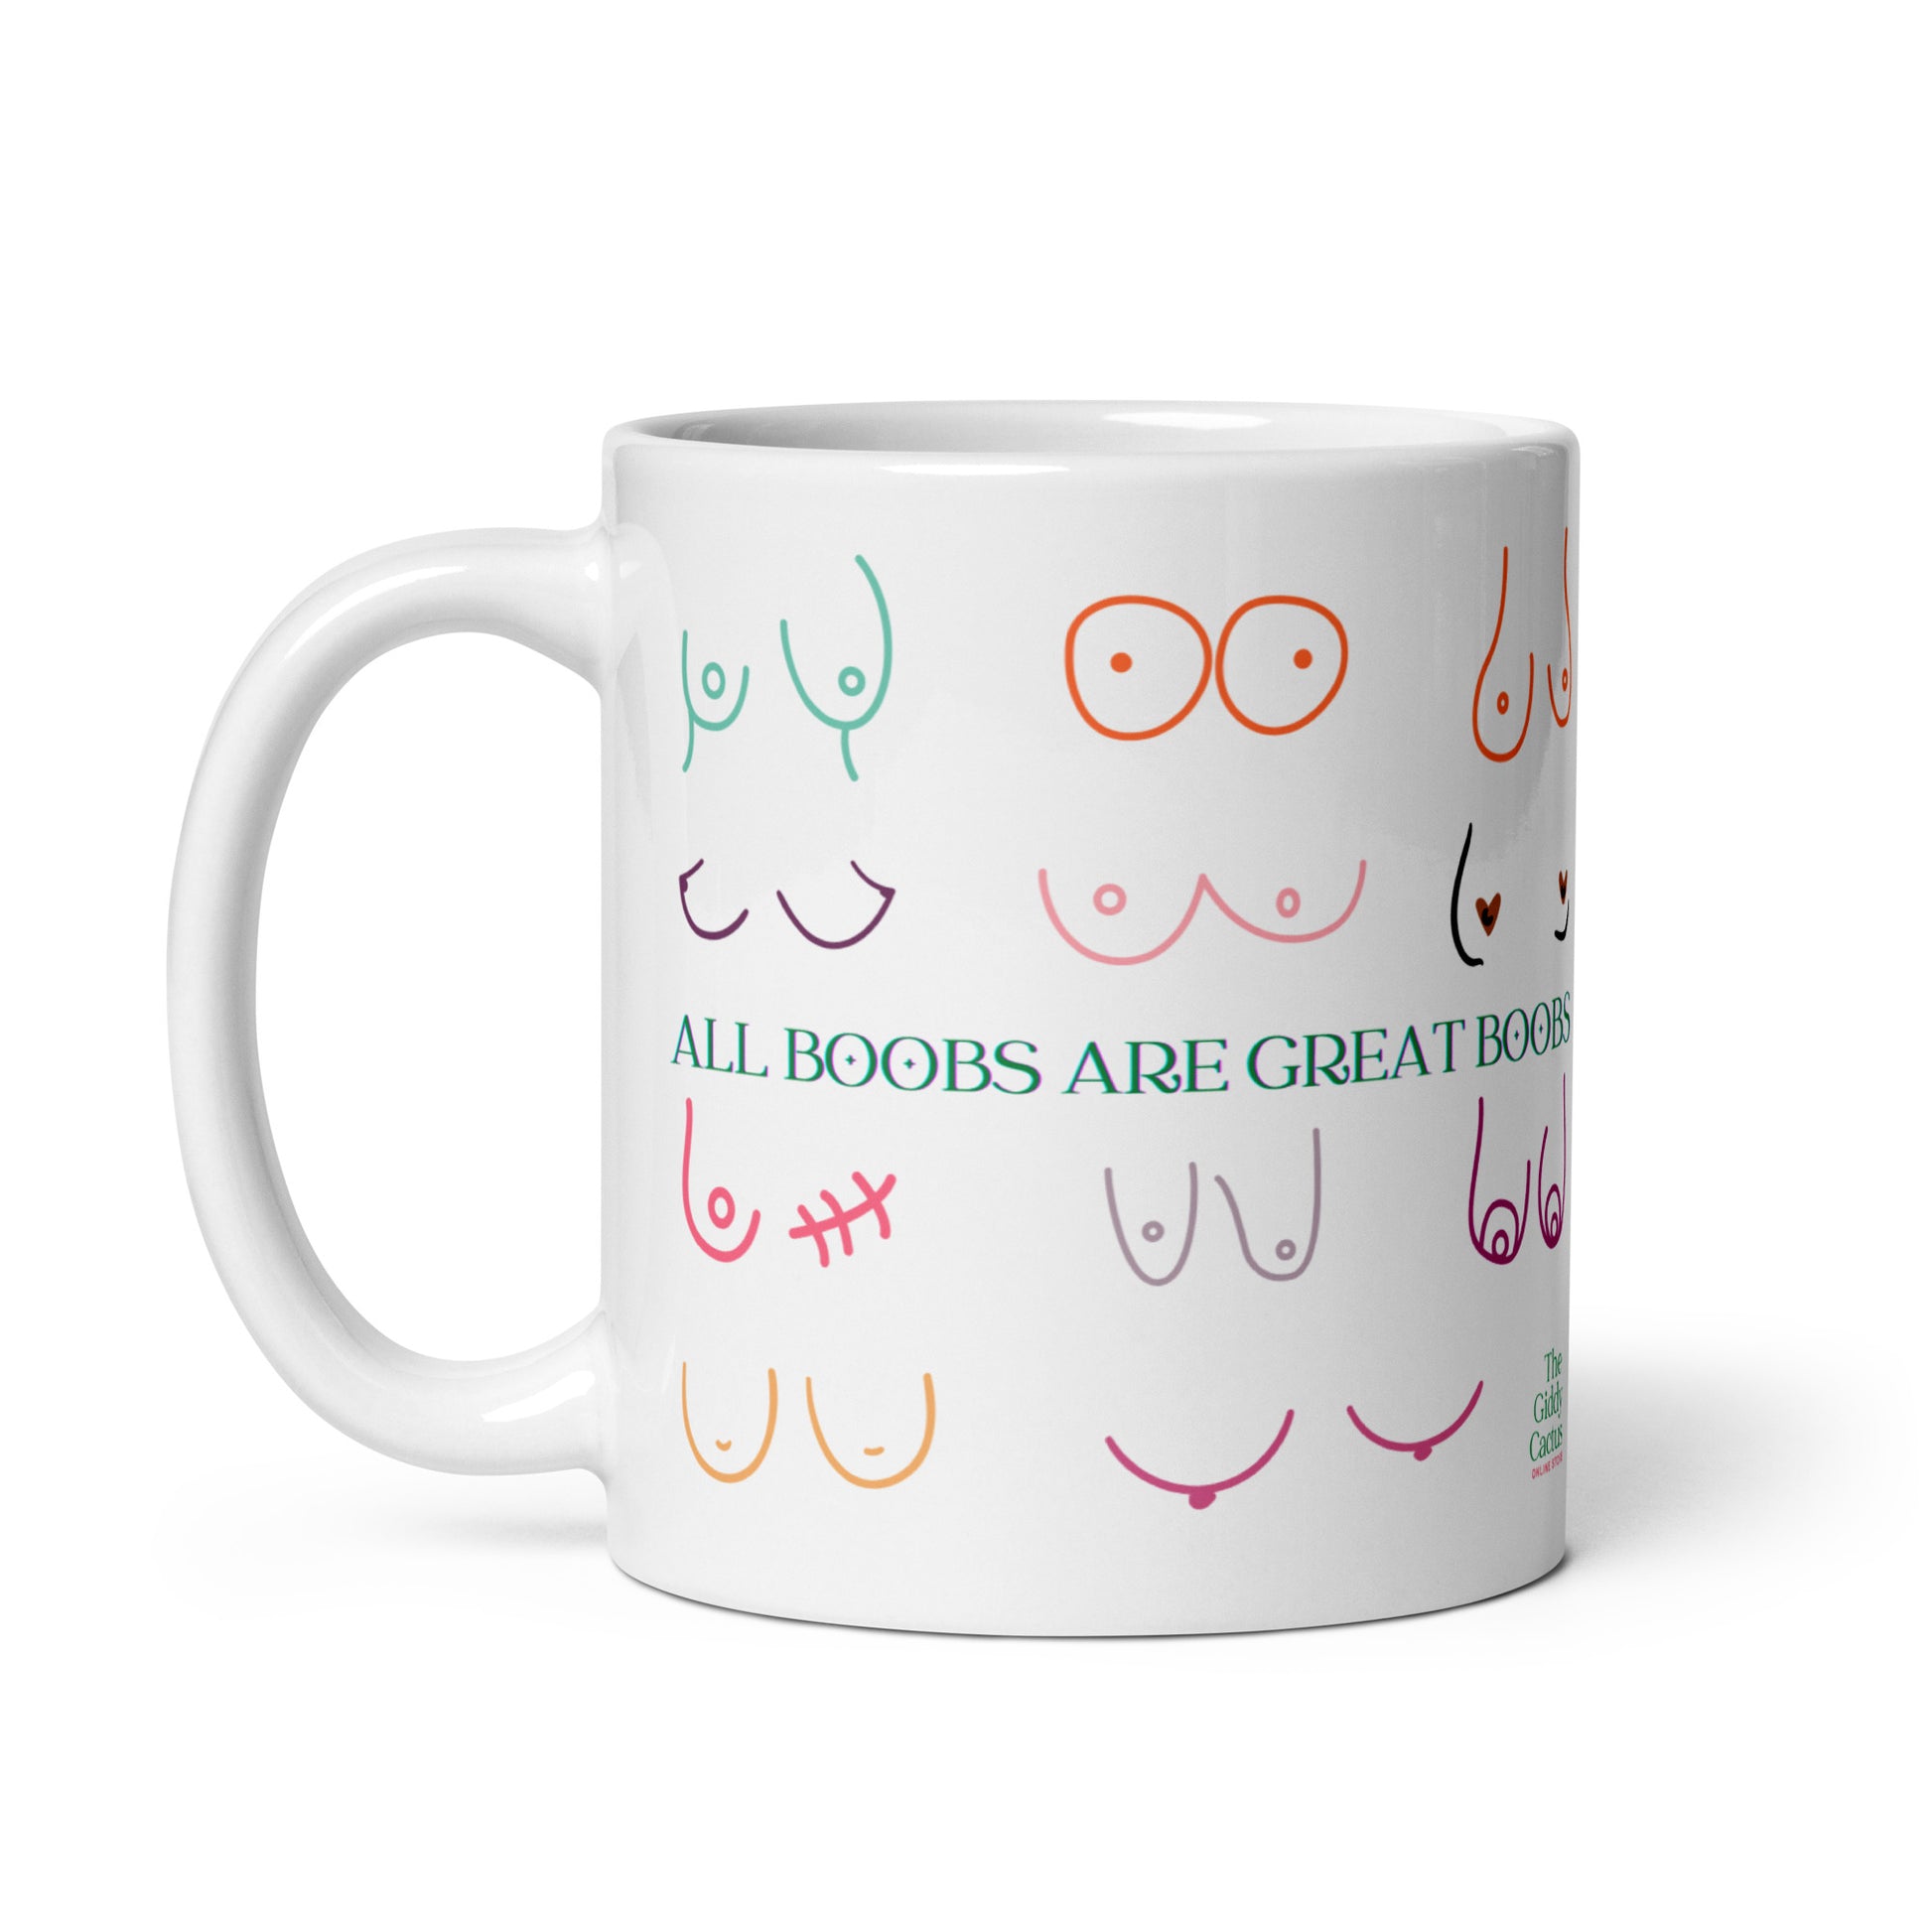 All Boobs Are Great Boobs Mug – The Giddy Cactus